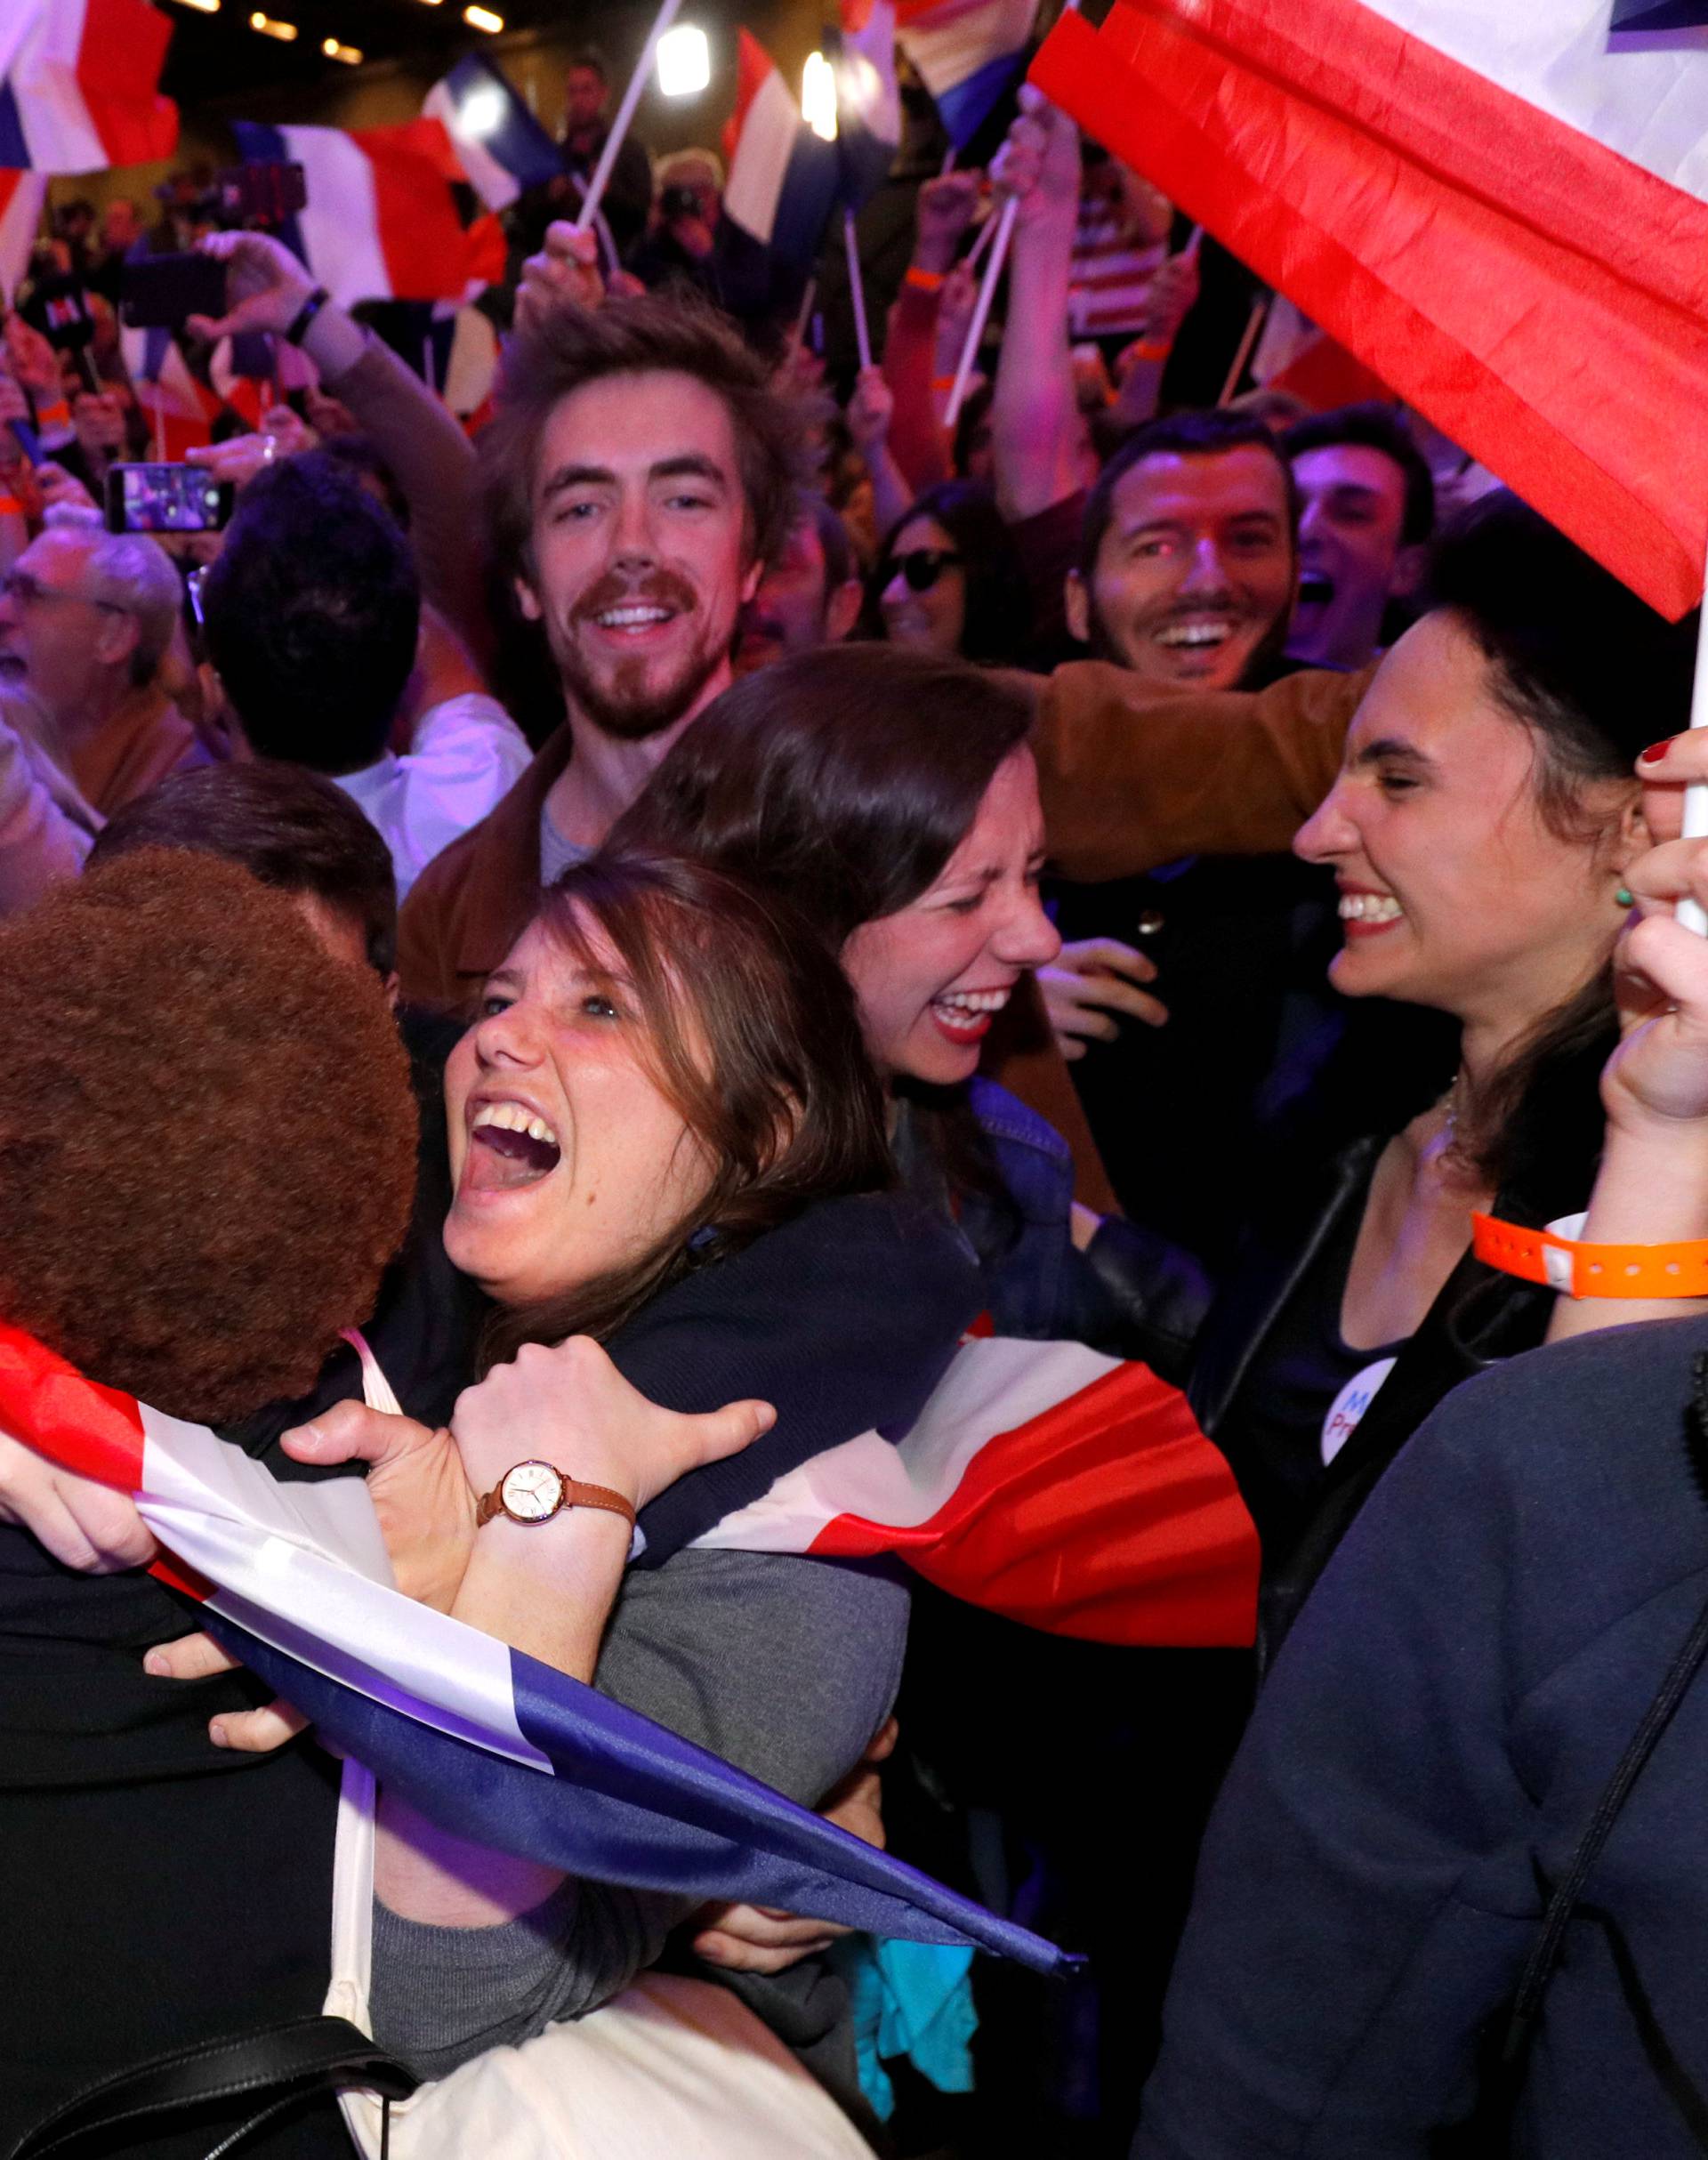 Supporters of Emmanuel Macron, head of the political movement En Marche !, or Onwards !, and candidate for the 2017 French presidential election, react after early results in the first round of 2017 French presidential election, in Paris